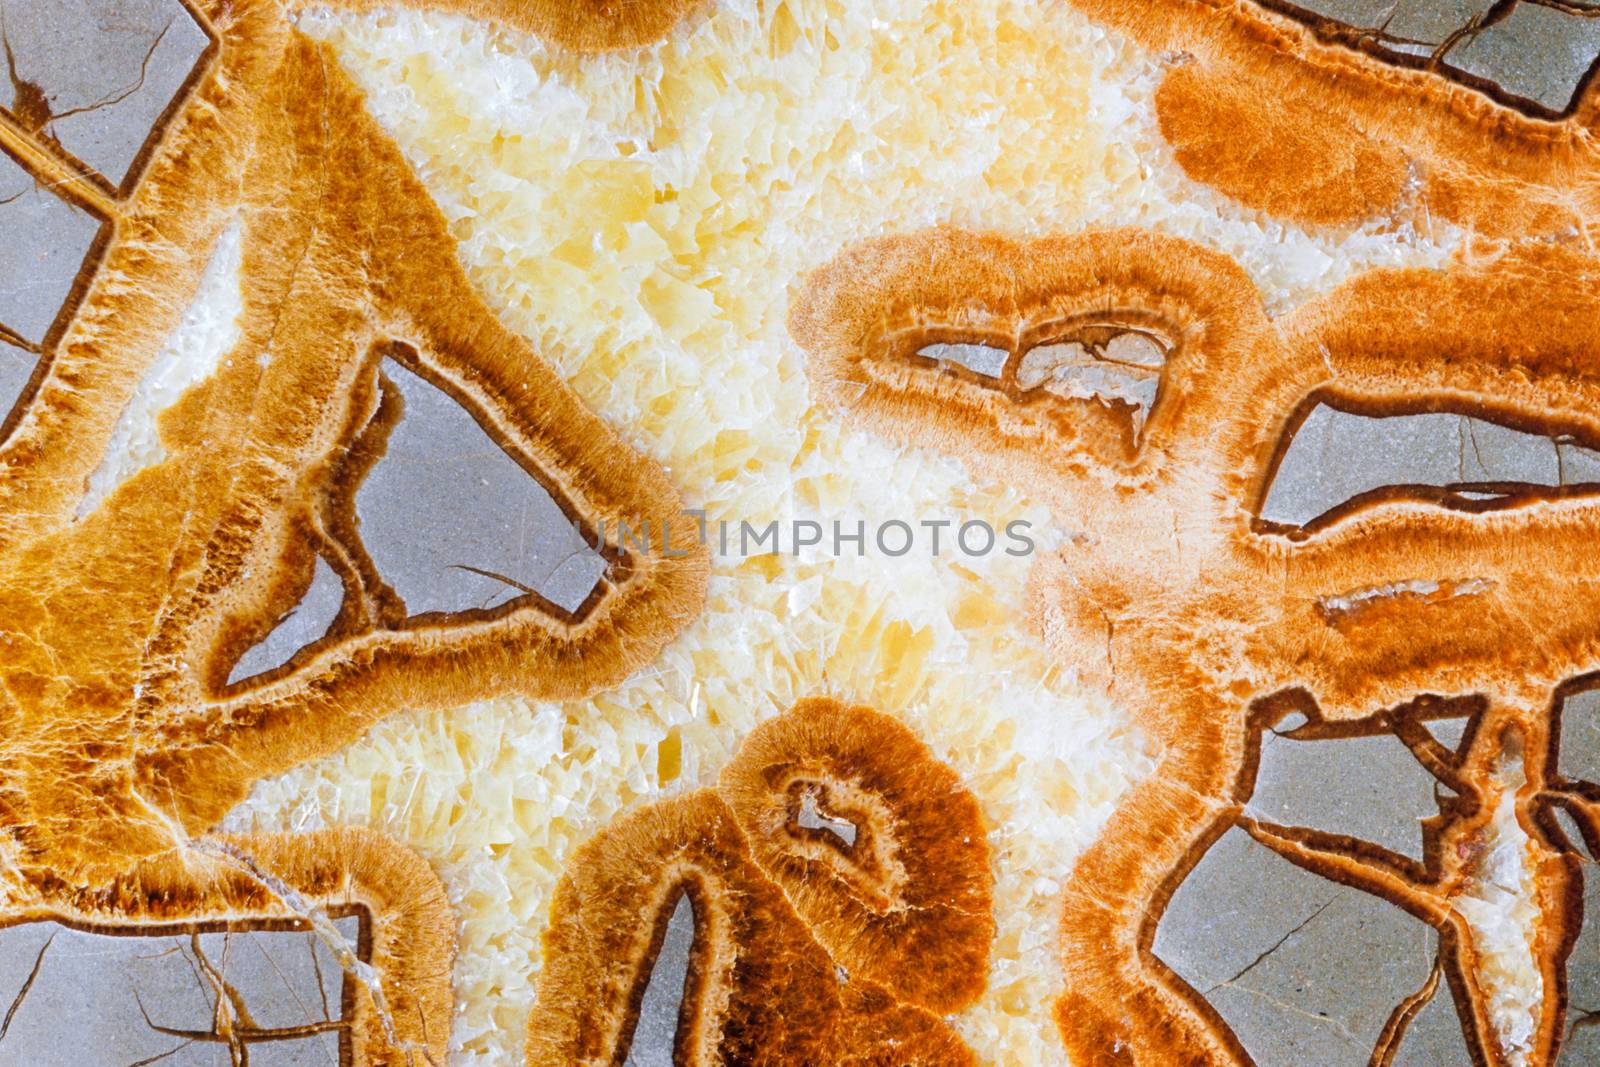 Septarian concretion geology background pattern by PiLens